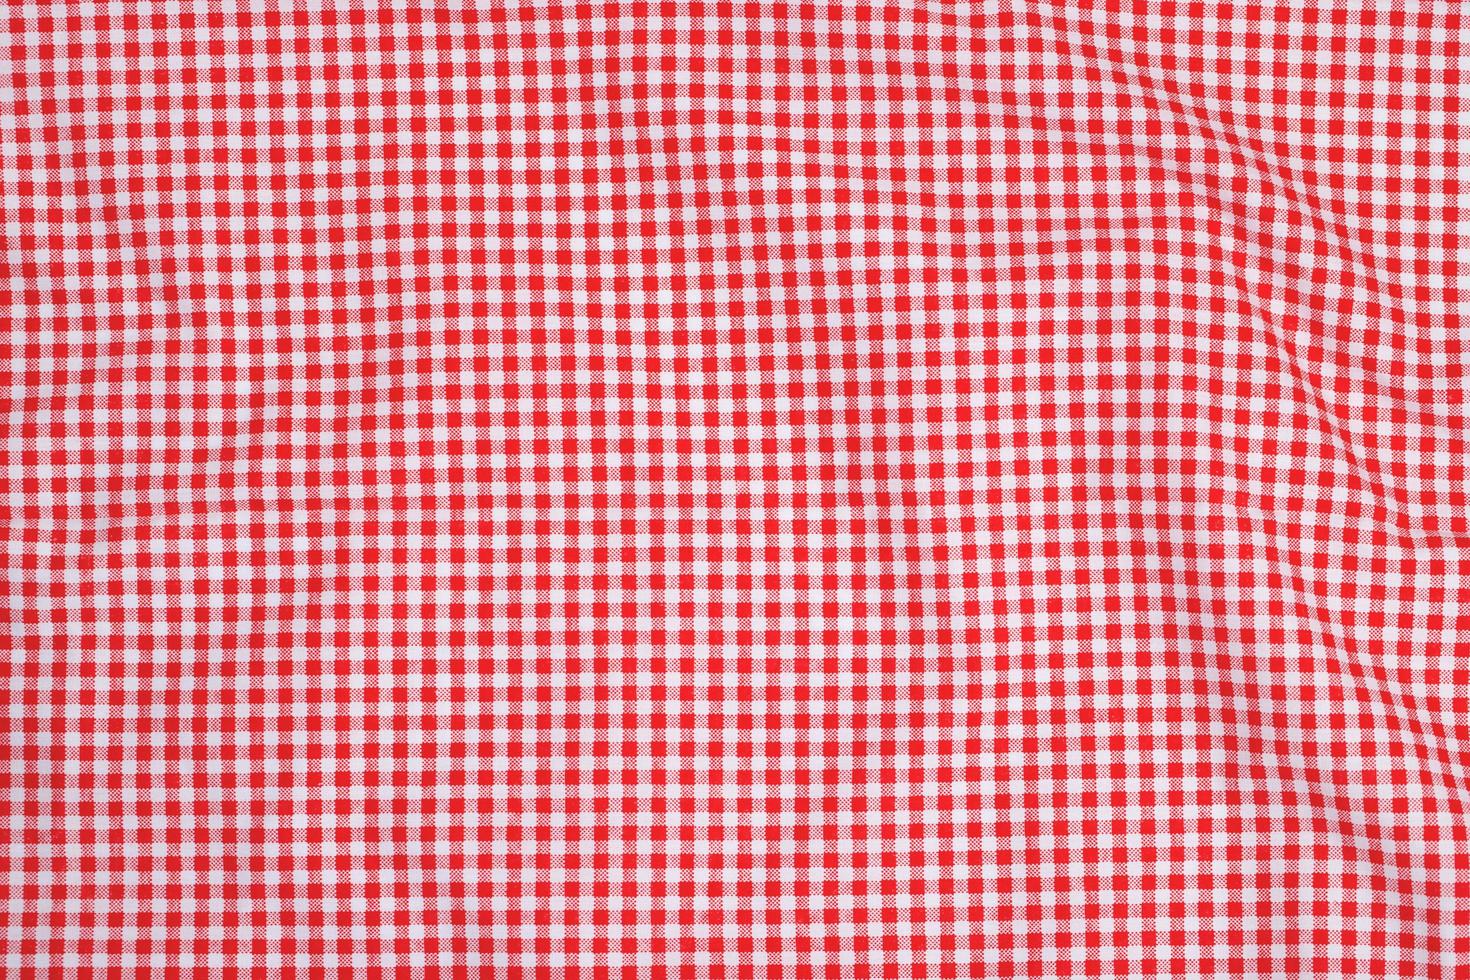 red white plaid tablecloth background photo